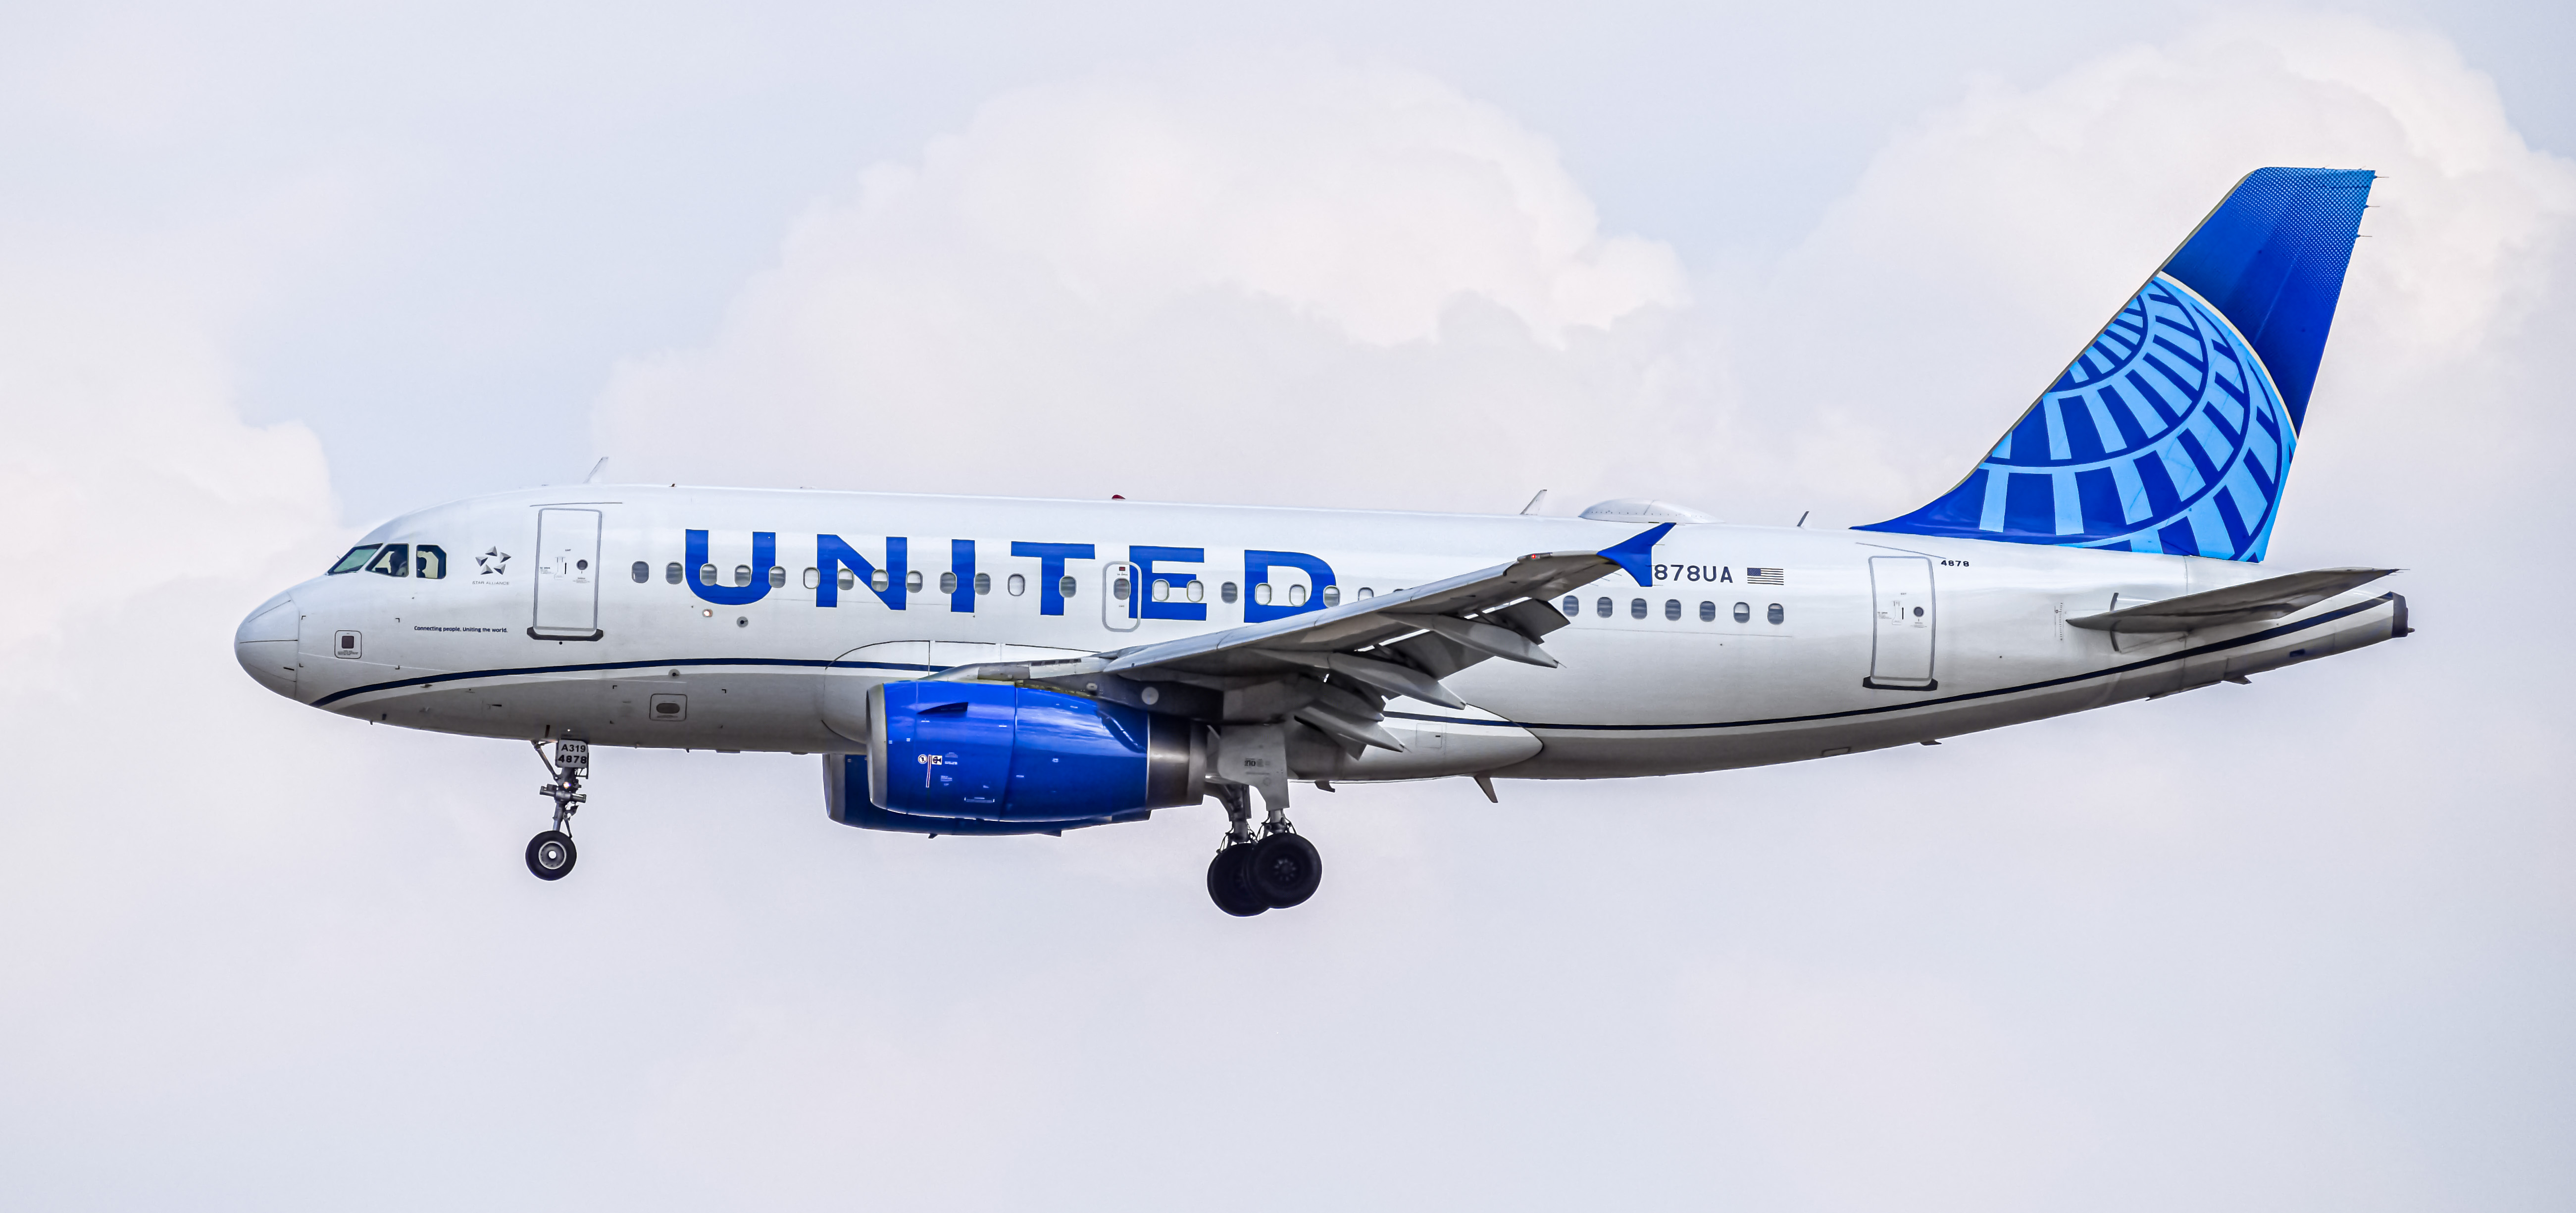 Photo of N878UA - United Airlines Airbus A319 at DEN